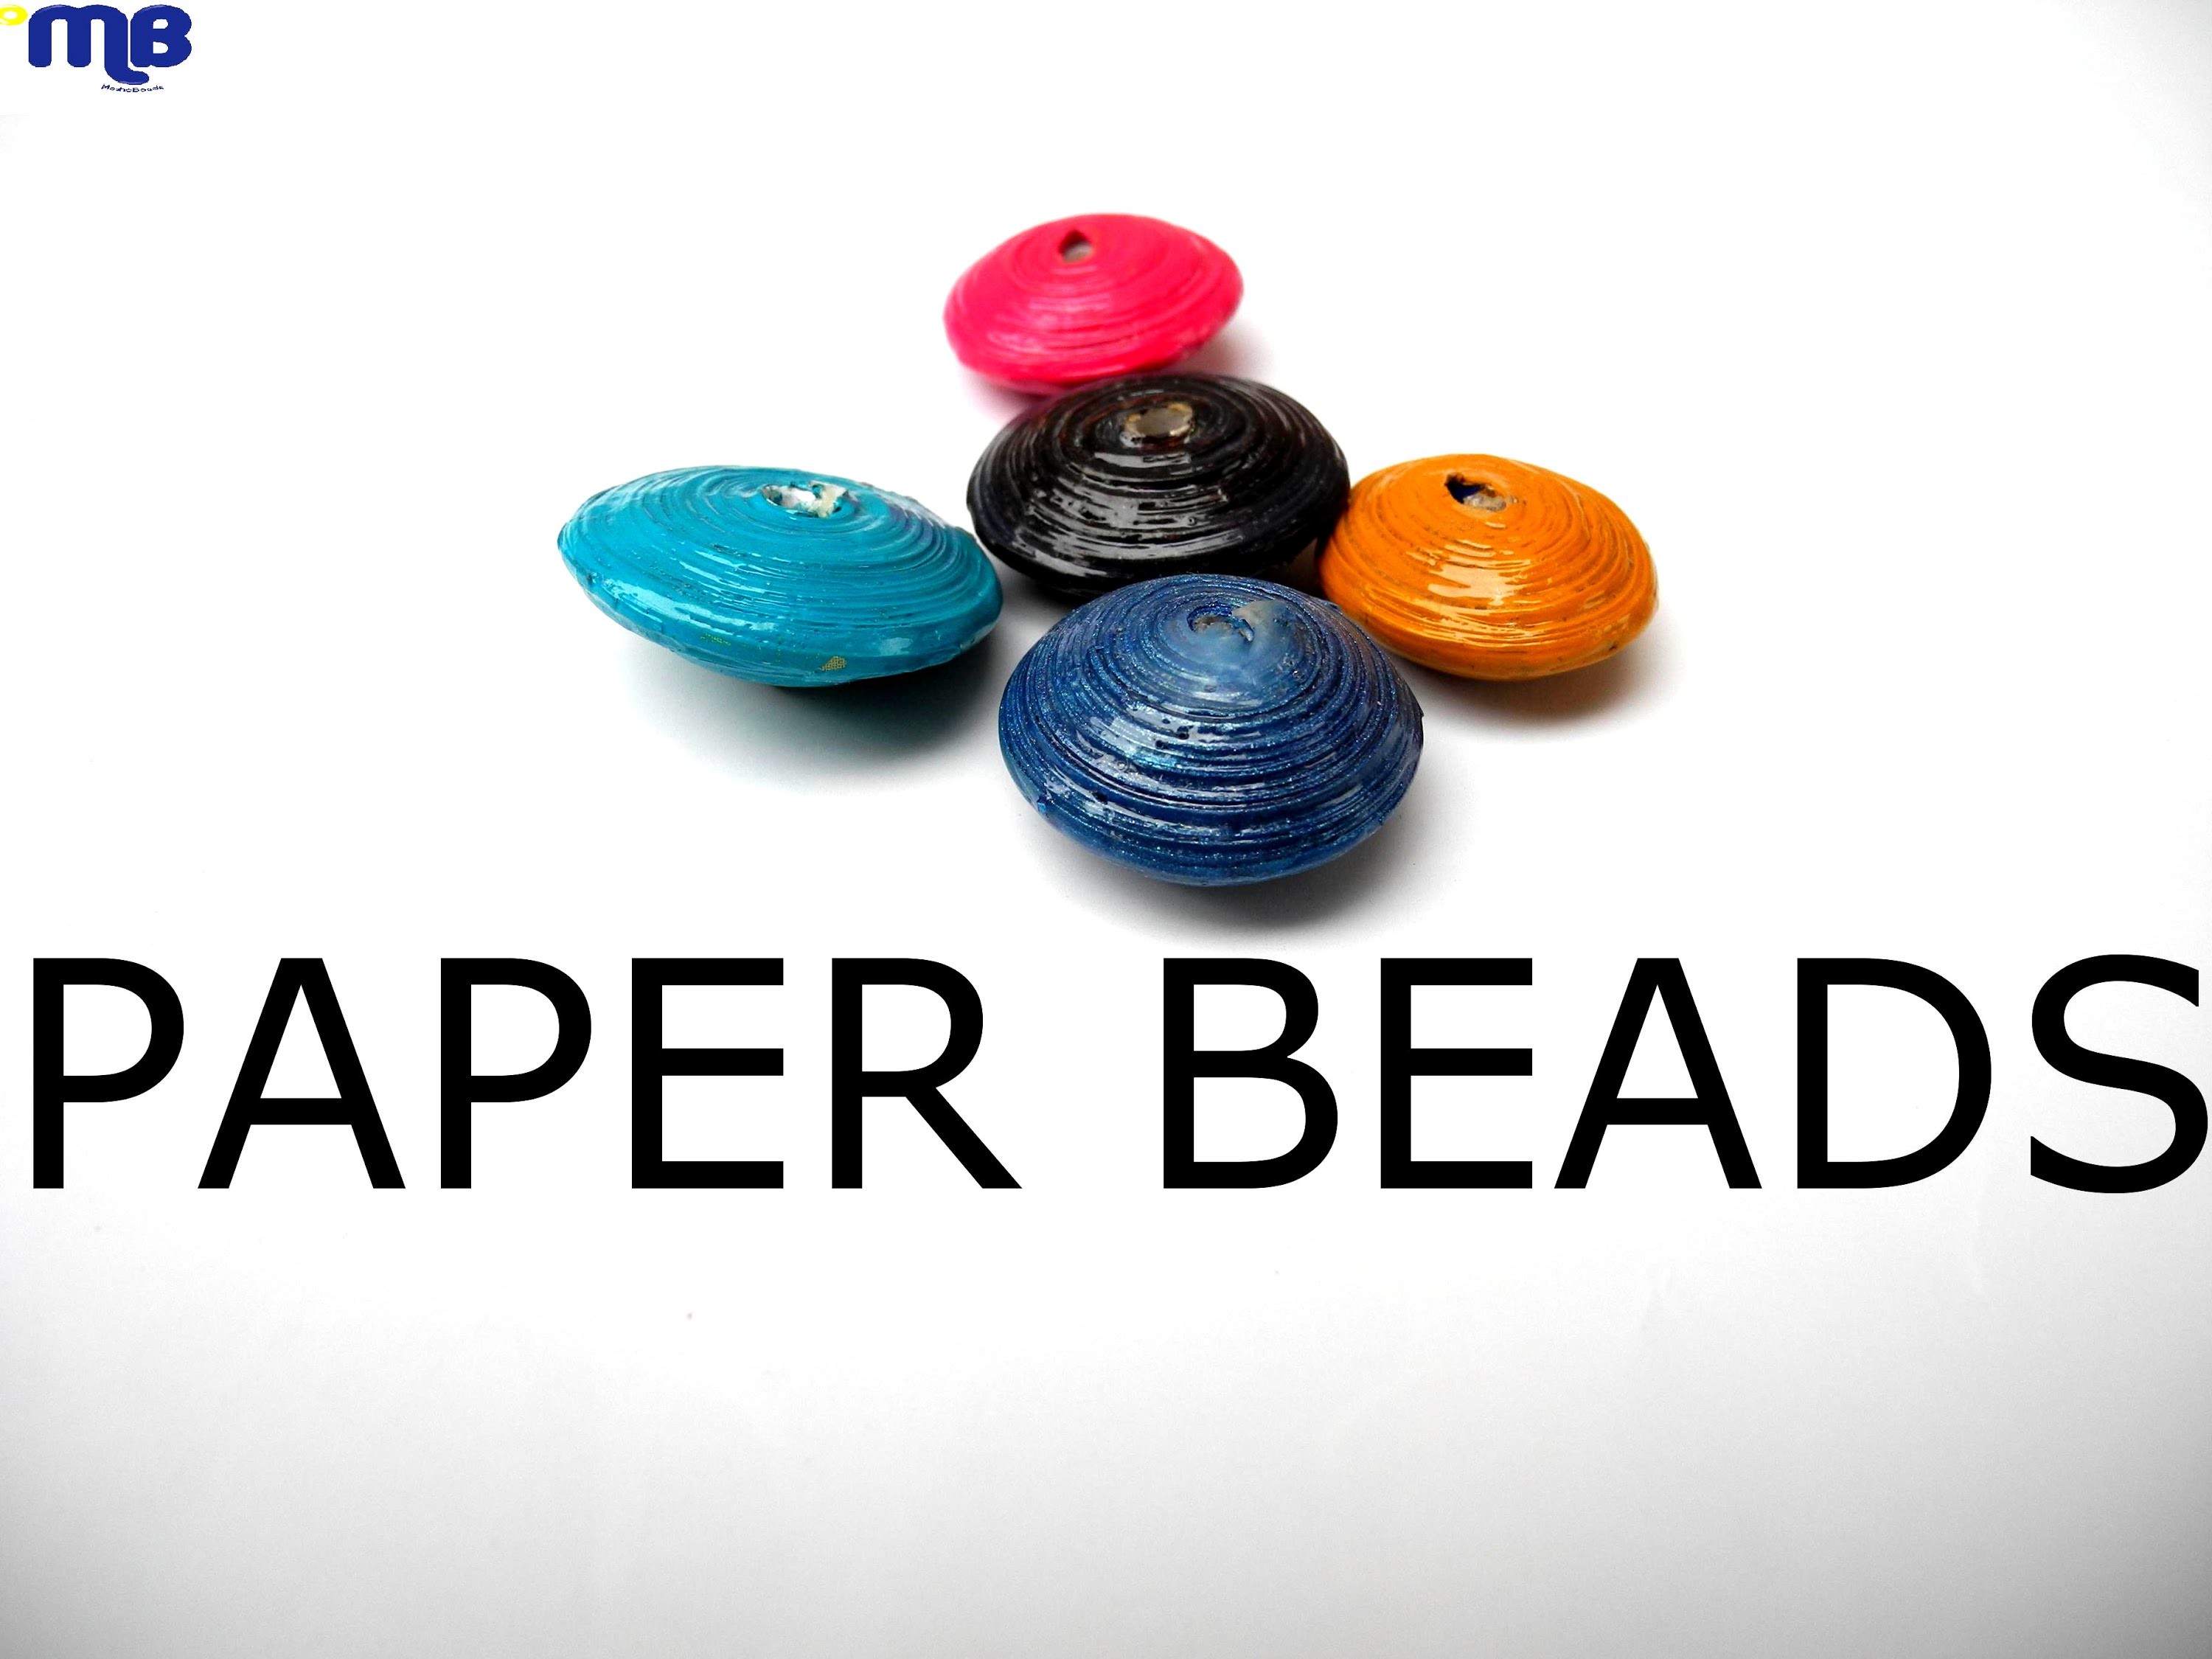 How to paint paper beads-Tutorial